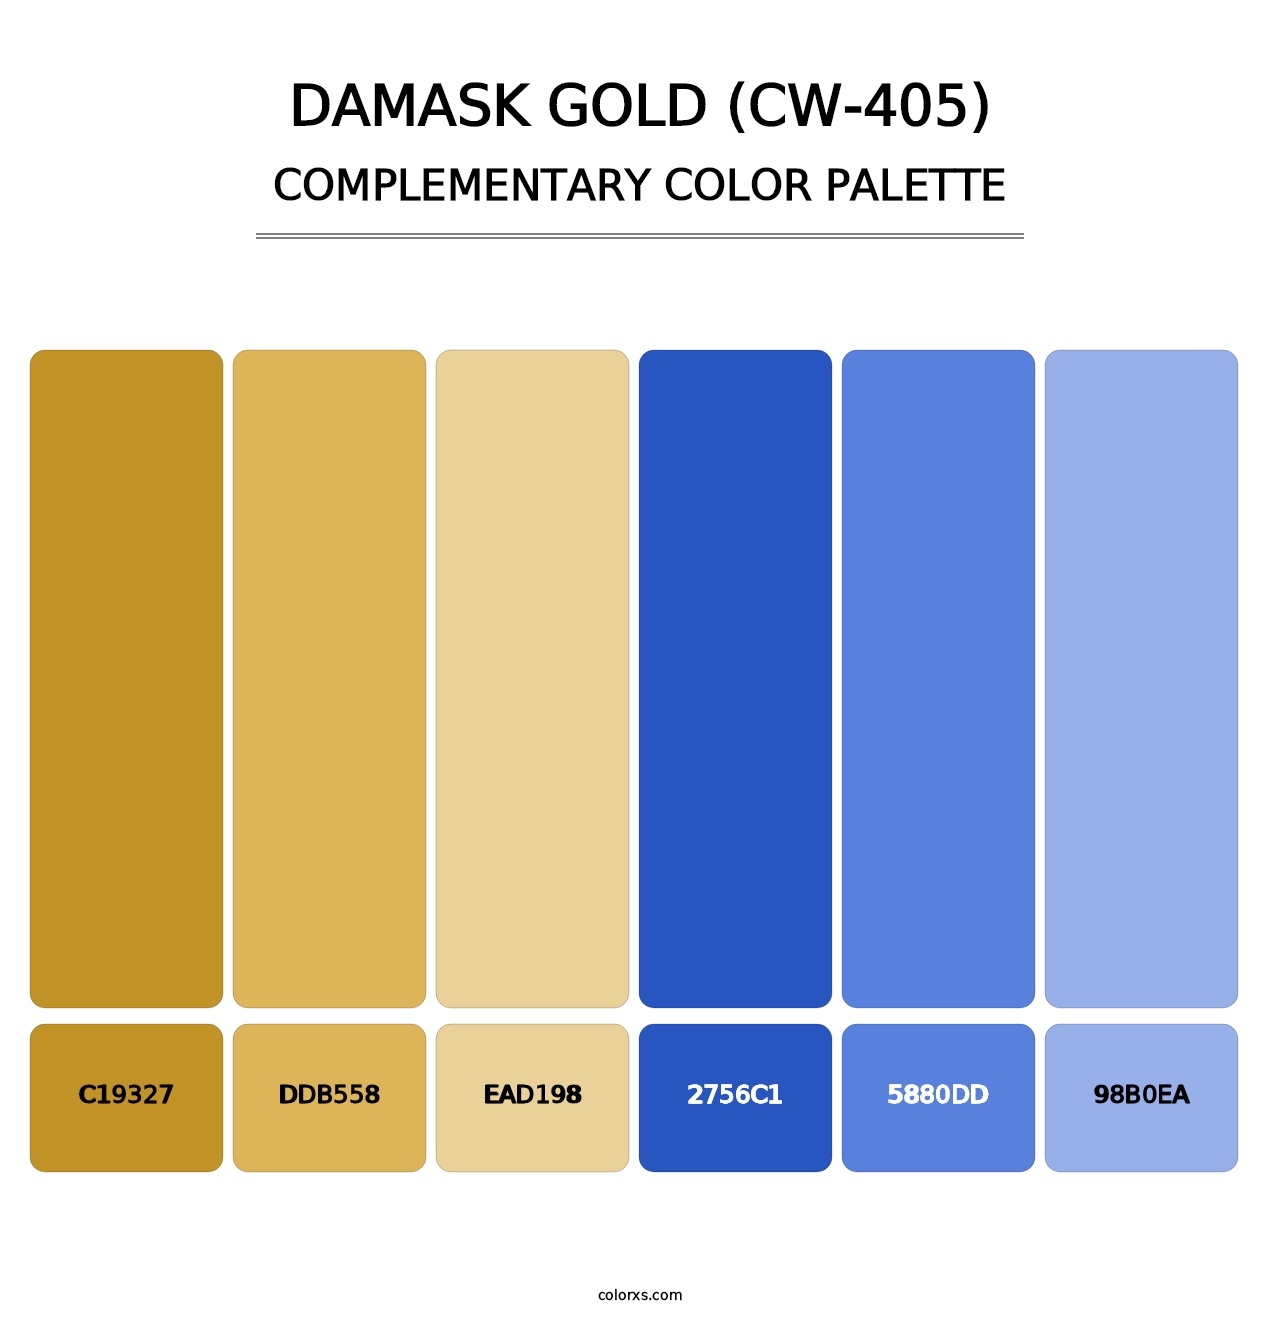 Damask Gold (CW-405) - Complementary Color Palette